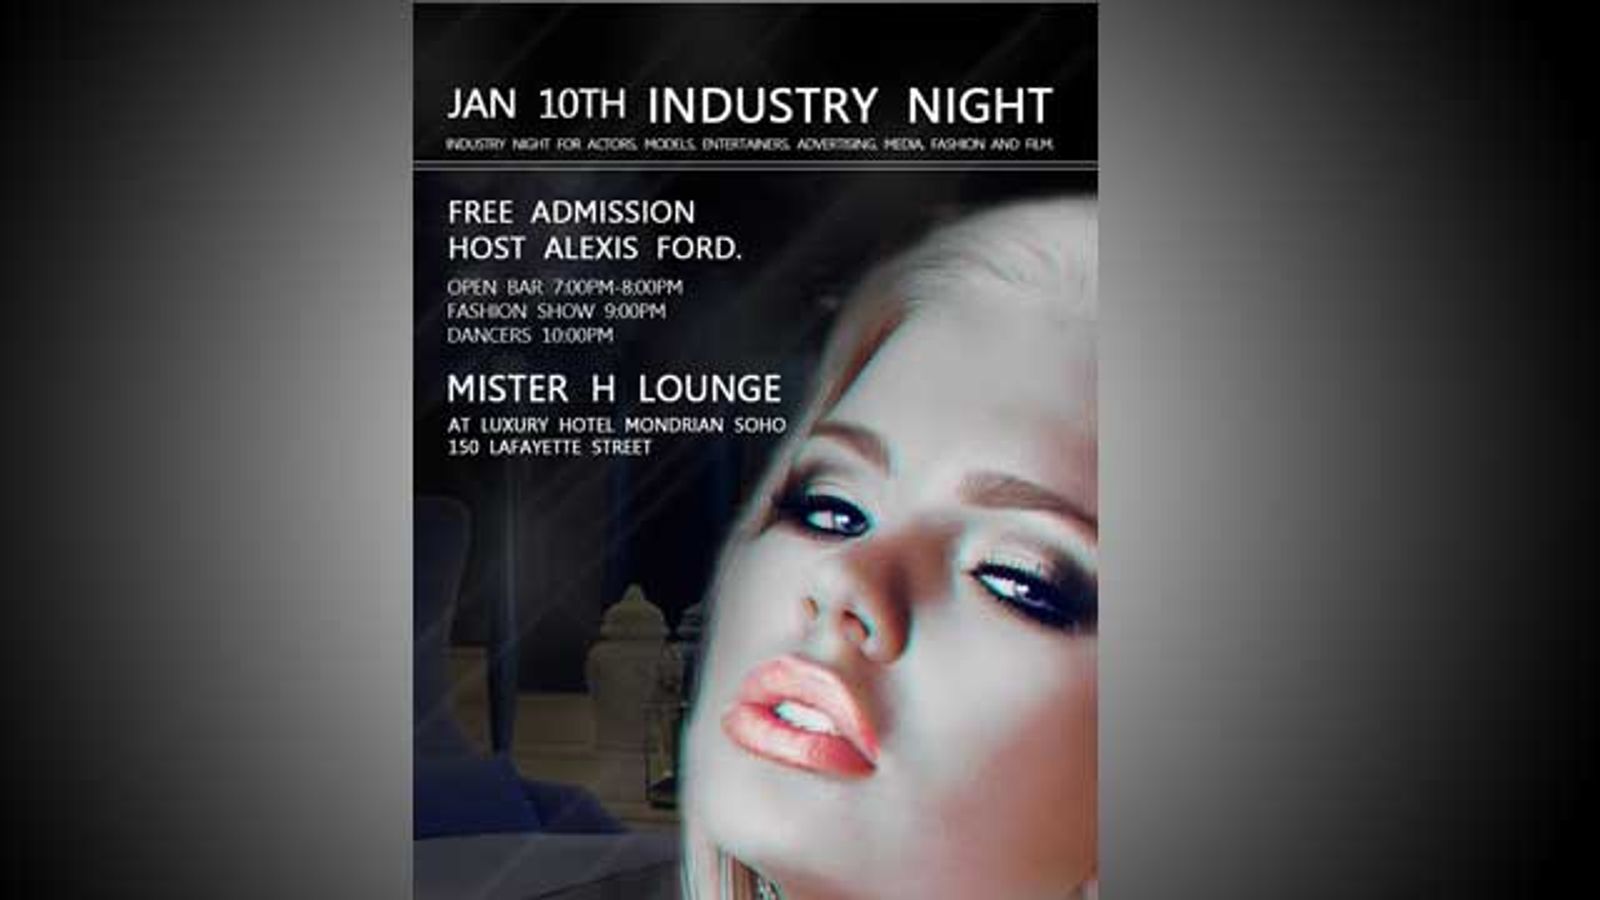 Alexis Ford to Host Mister H Lounge Industry Night Jan. 10 in NYC